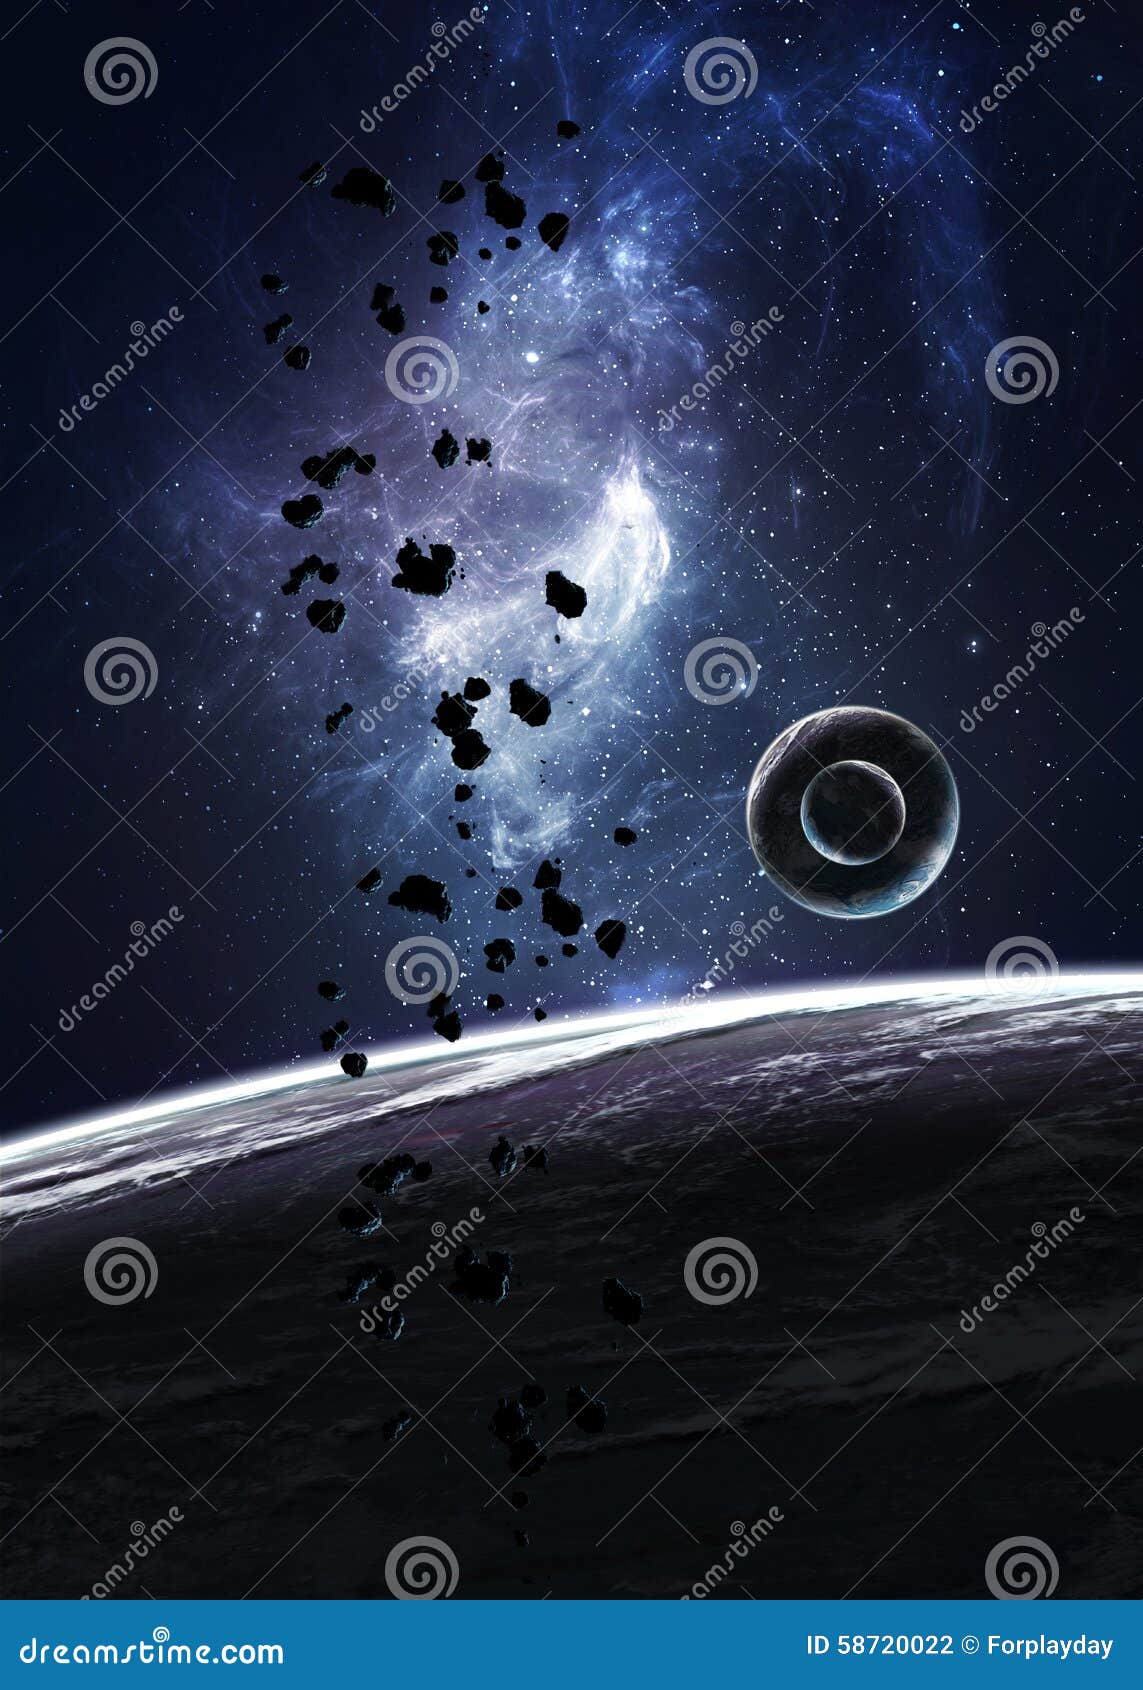 planets over the nebulae in space